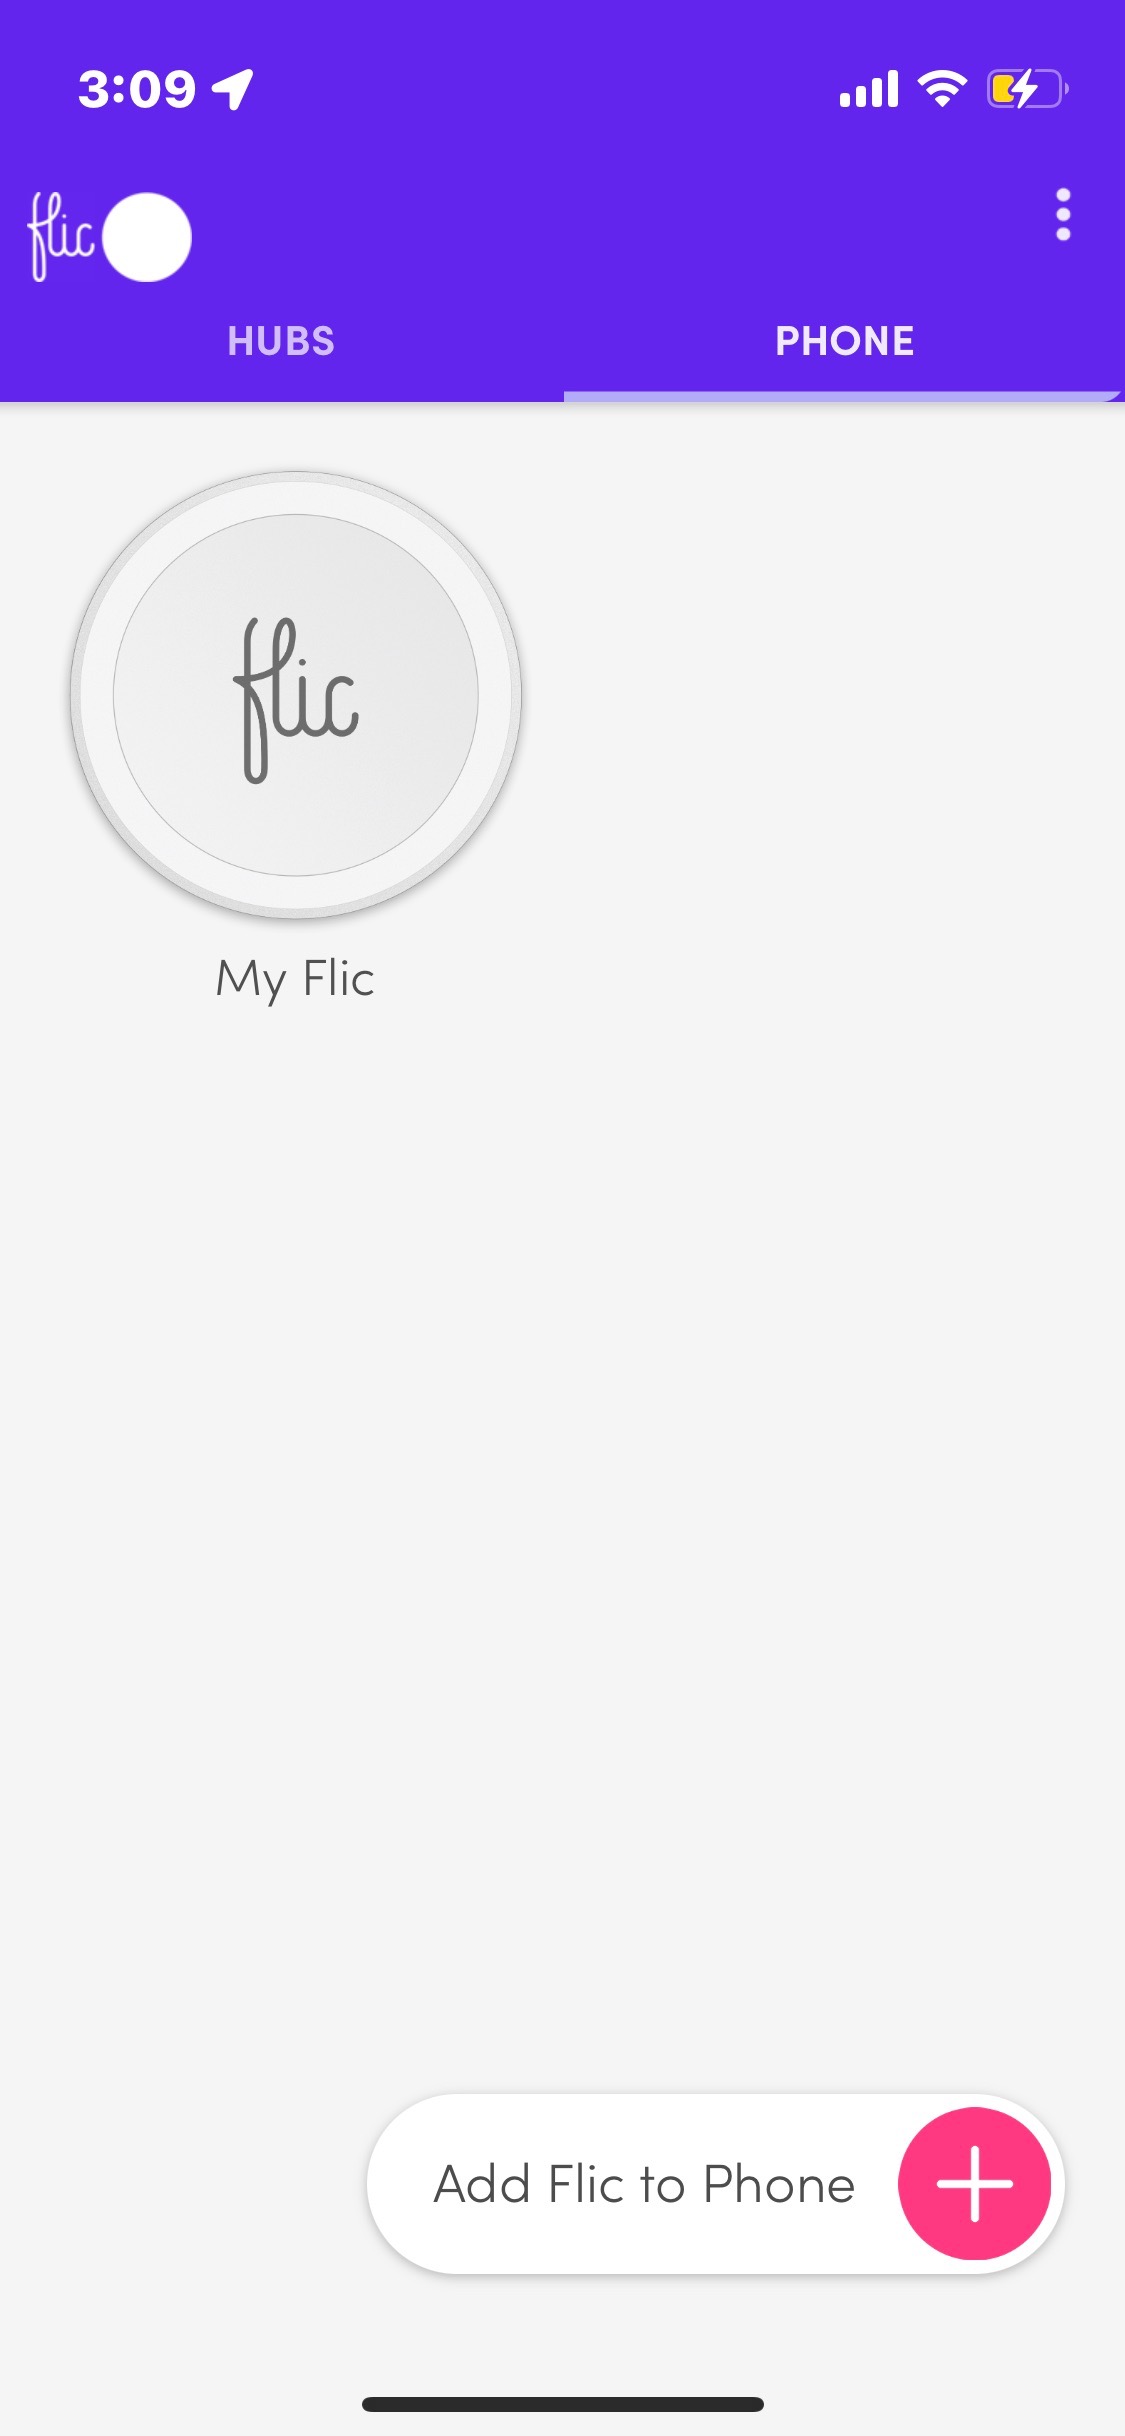 Using a Flic as a One Button Tracker - Project Logs - Quantified Self Forum